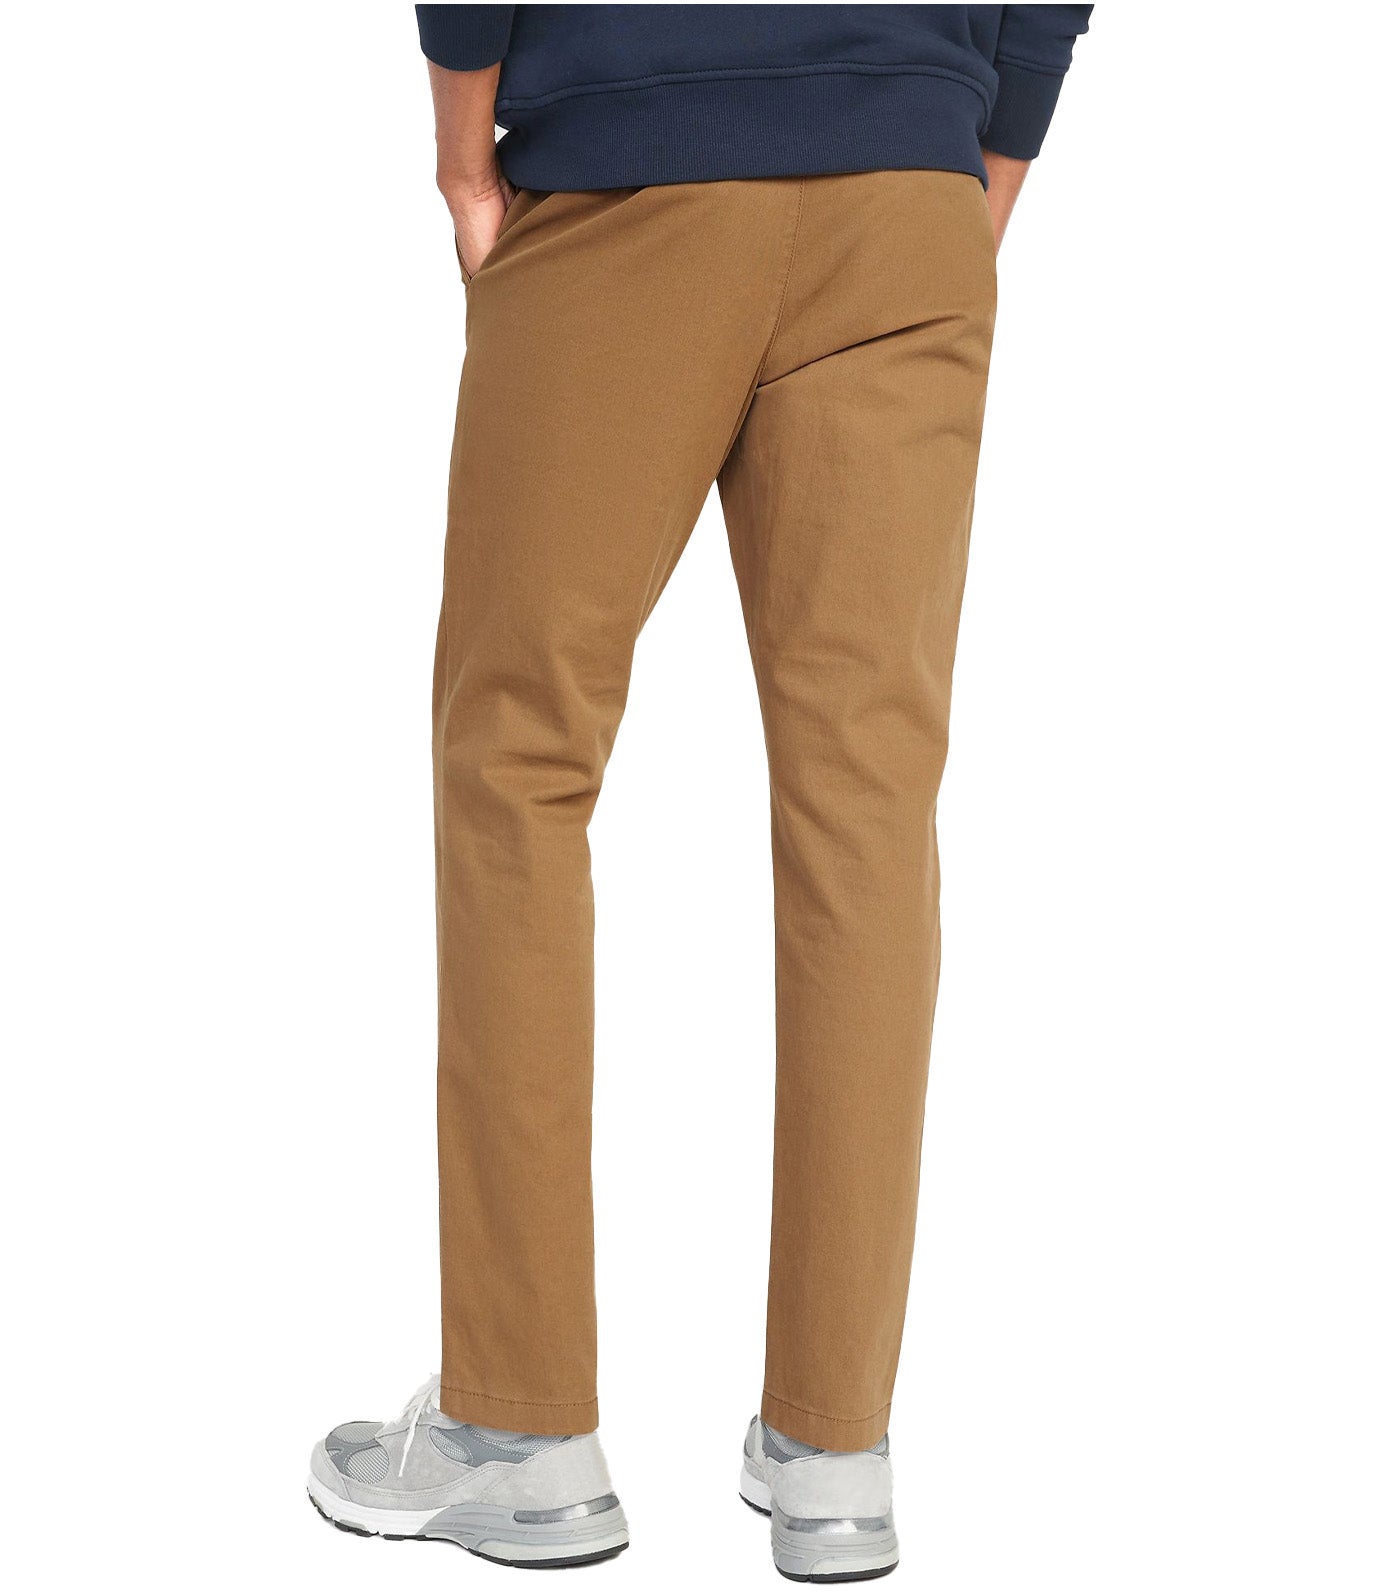 Straight Built-In Flex Rotation Chino Pants for Men Doe A Deer